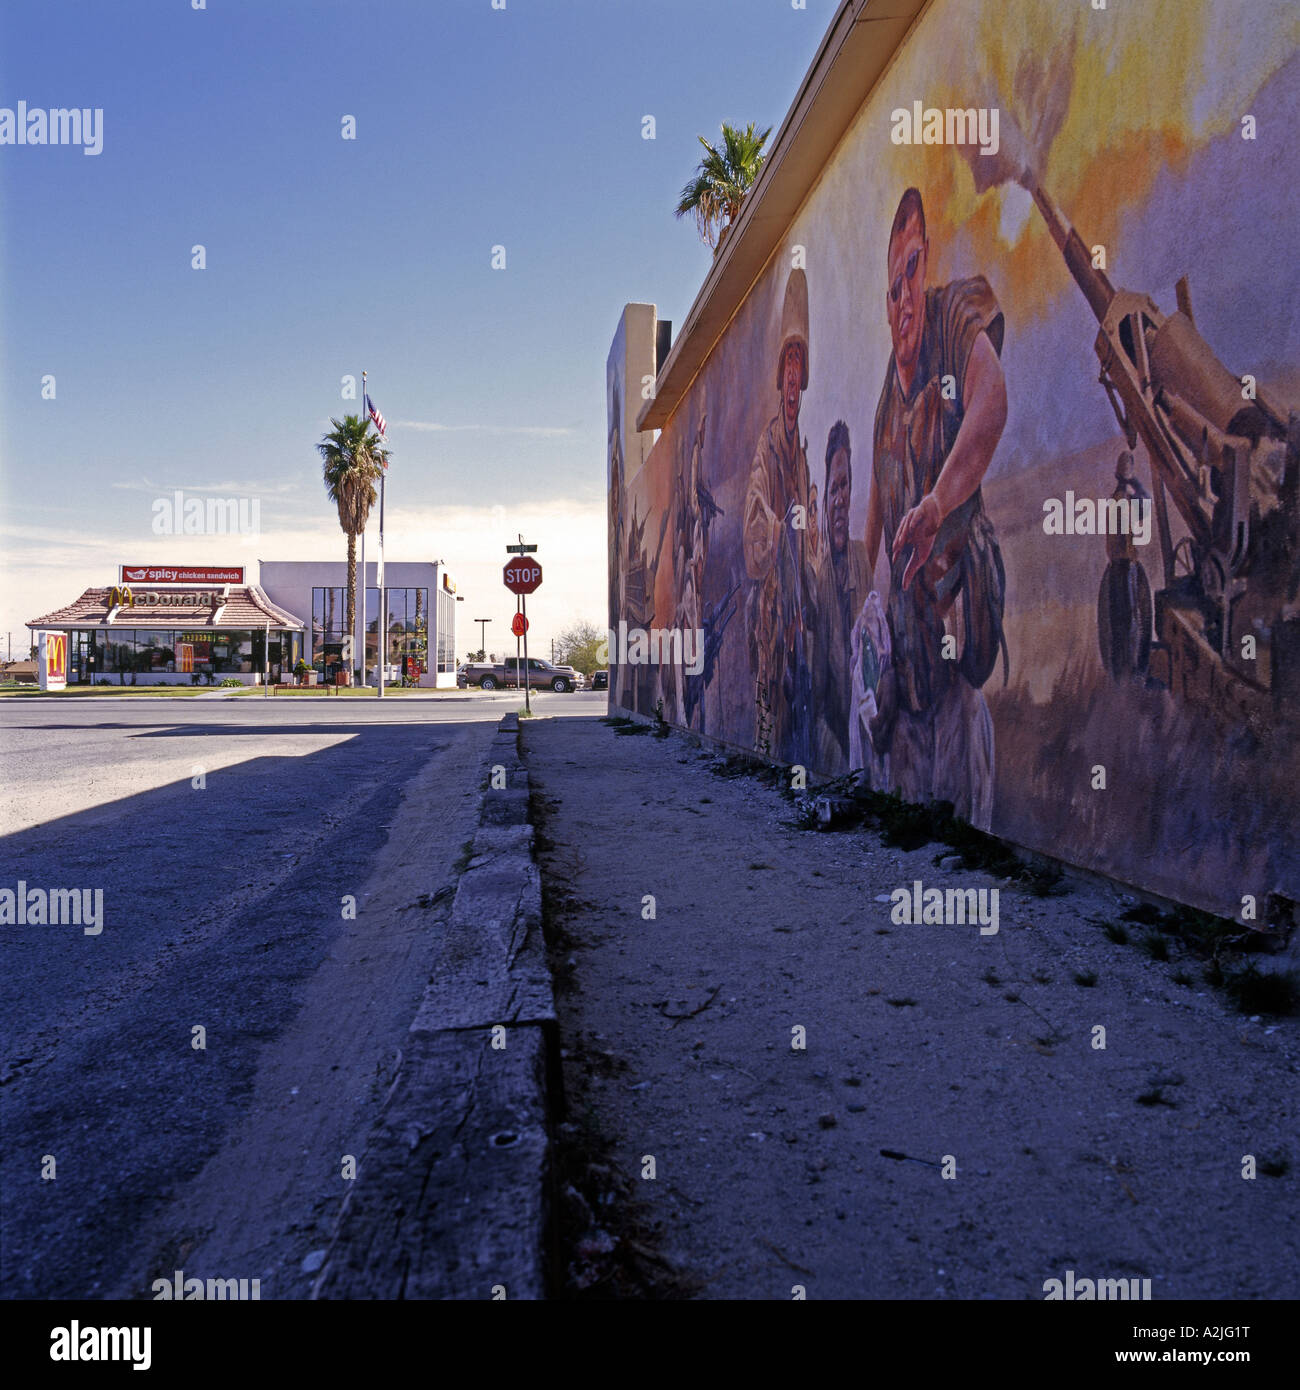 Mural depicting war scene, painted on the side of a building in Twentynine Palms, California,USA. Stock Photo